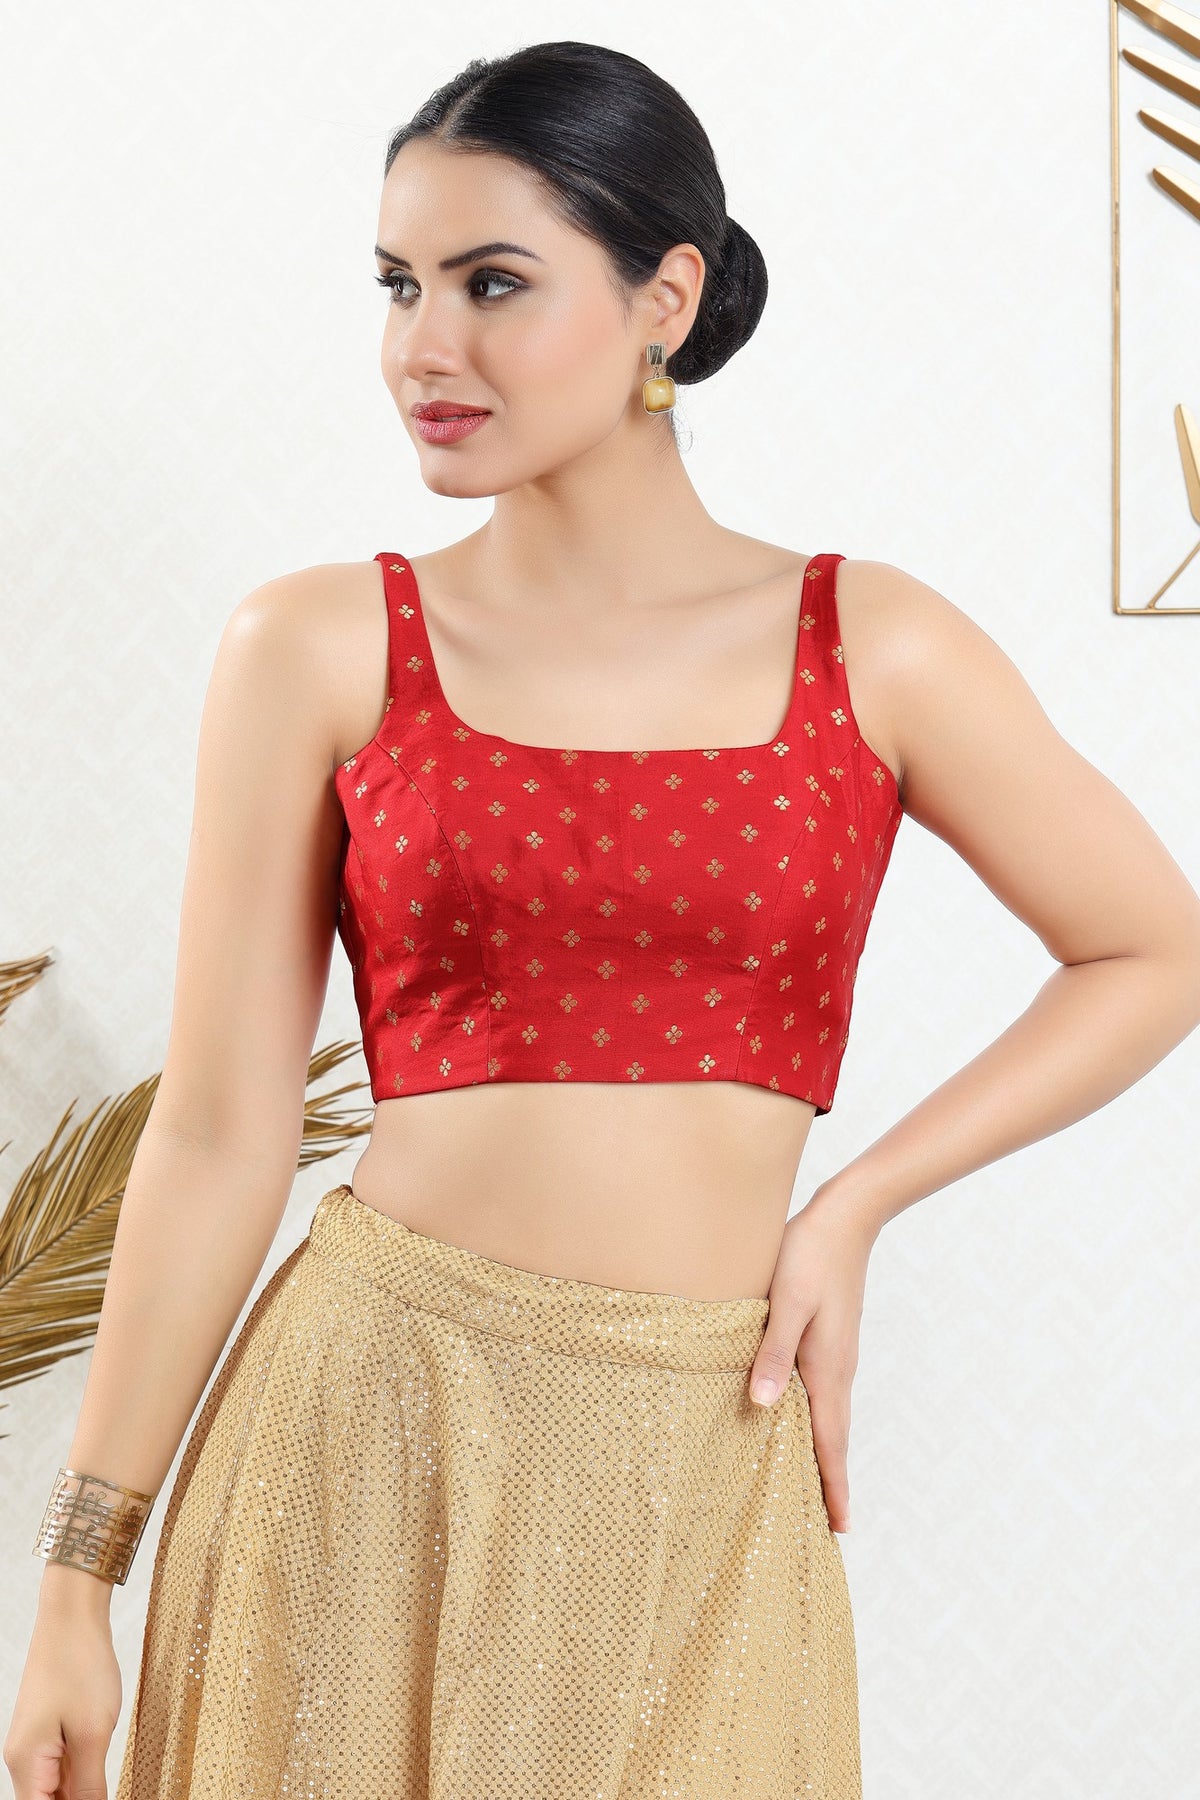 Red ready-made blouse with embroidered work